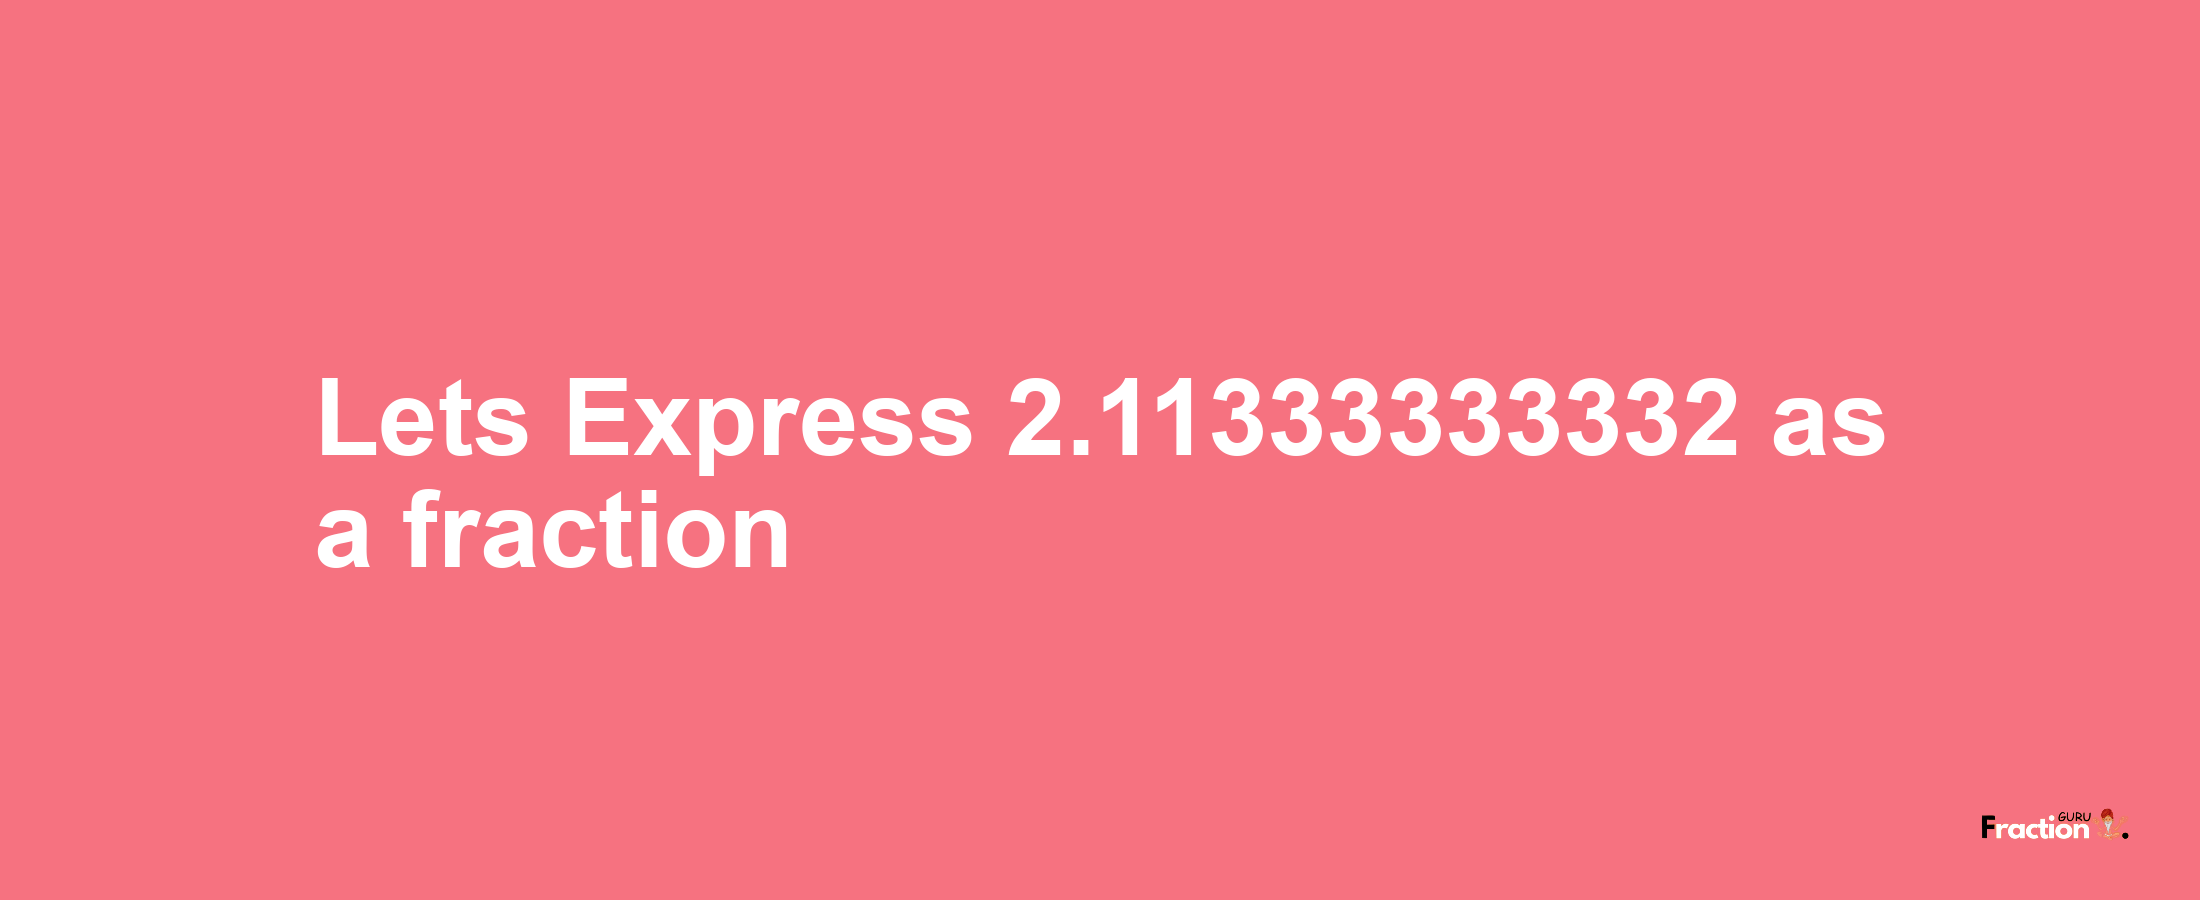 Lets Express 2.11333333332 as afraction